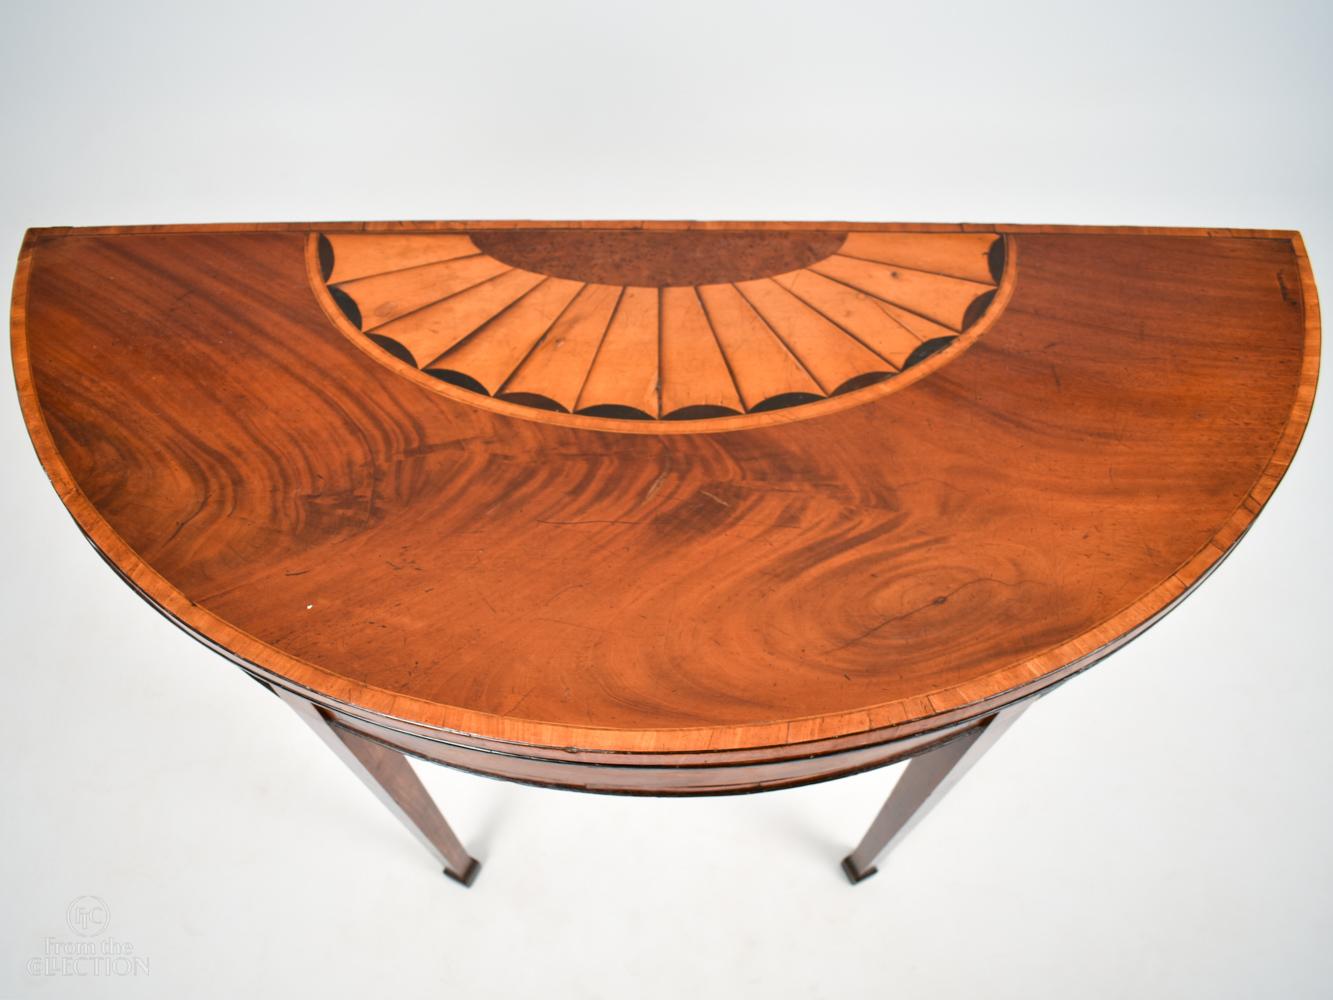 George III demi lune tea table with Sheraton design. Circa 1780 with deep dark surface colour inside the fold out top, mahogany and satinwood, on four tapered legs.